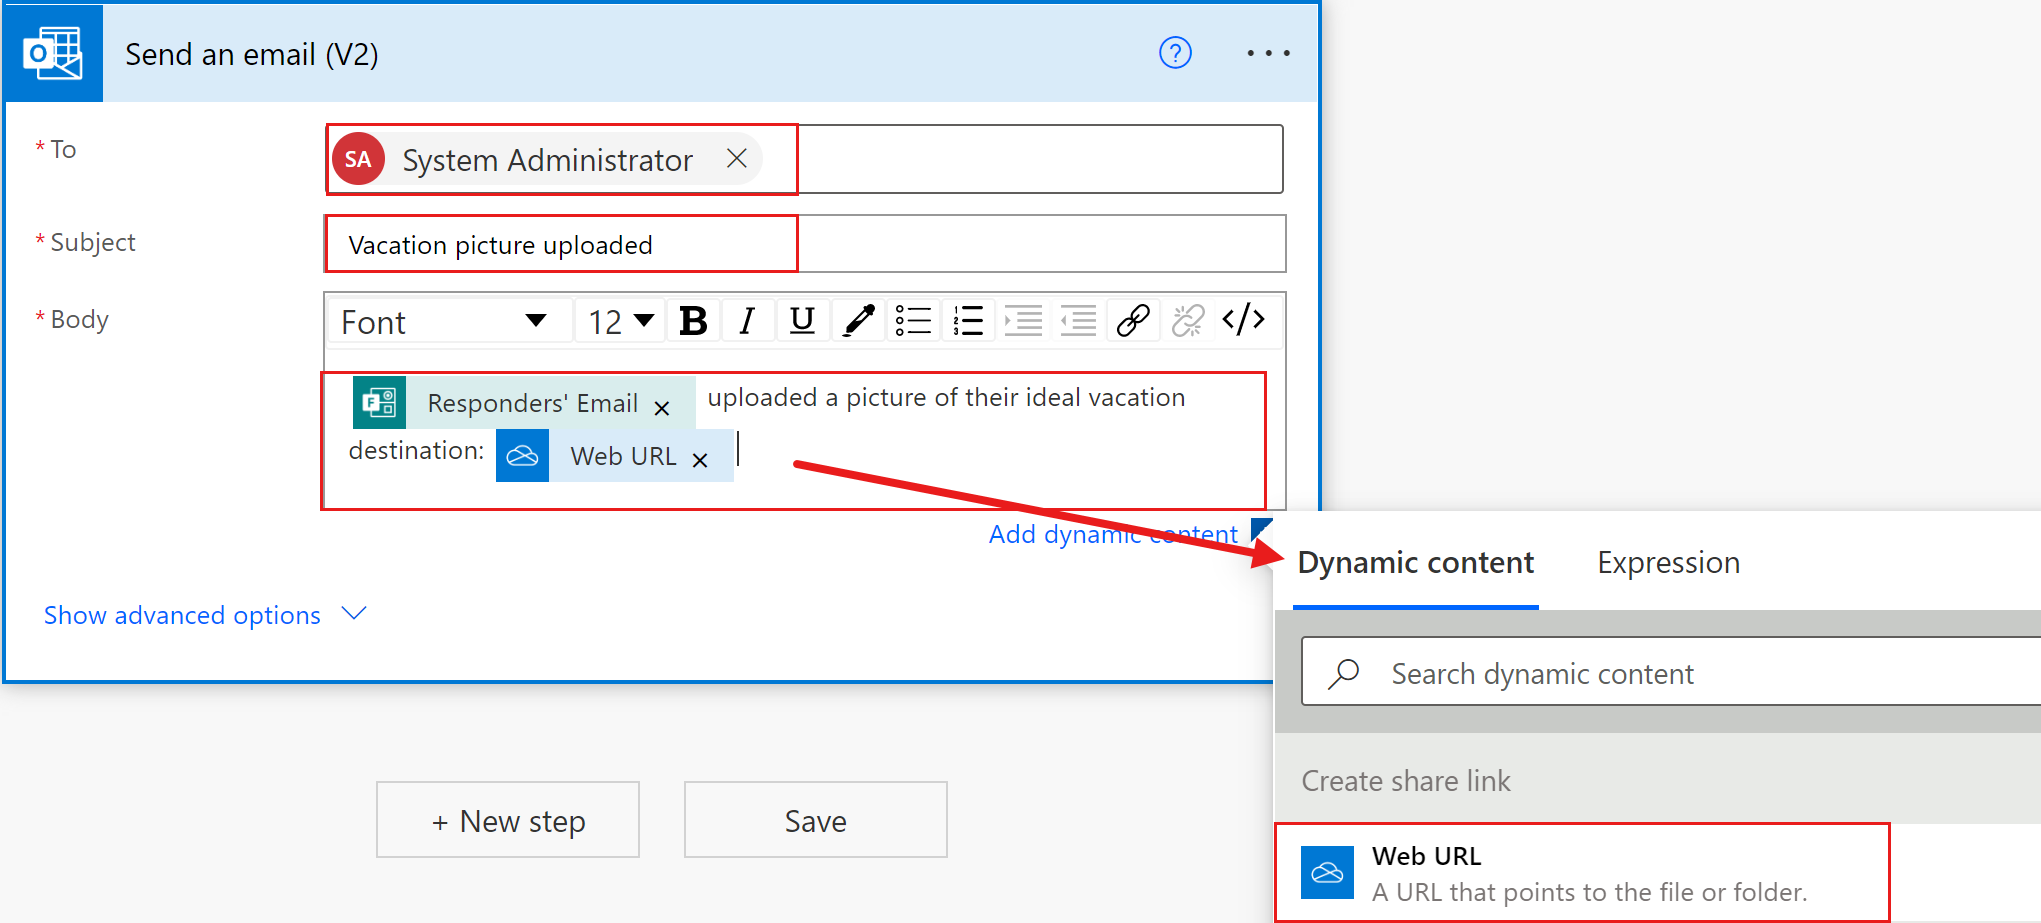 Screenshot of an Outlook send email action in a flow under construction, with custom information and dynamic content highlighted.